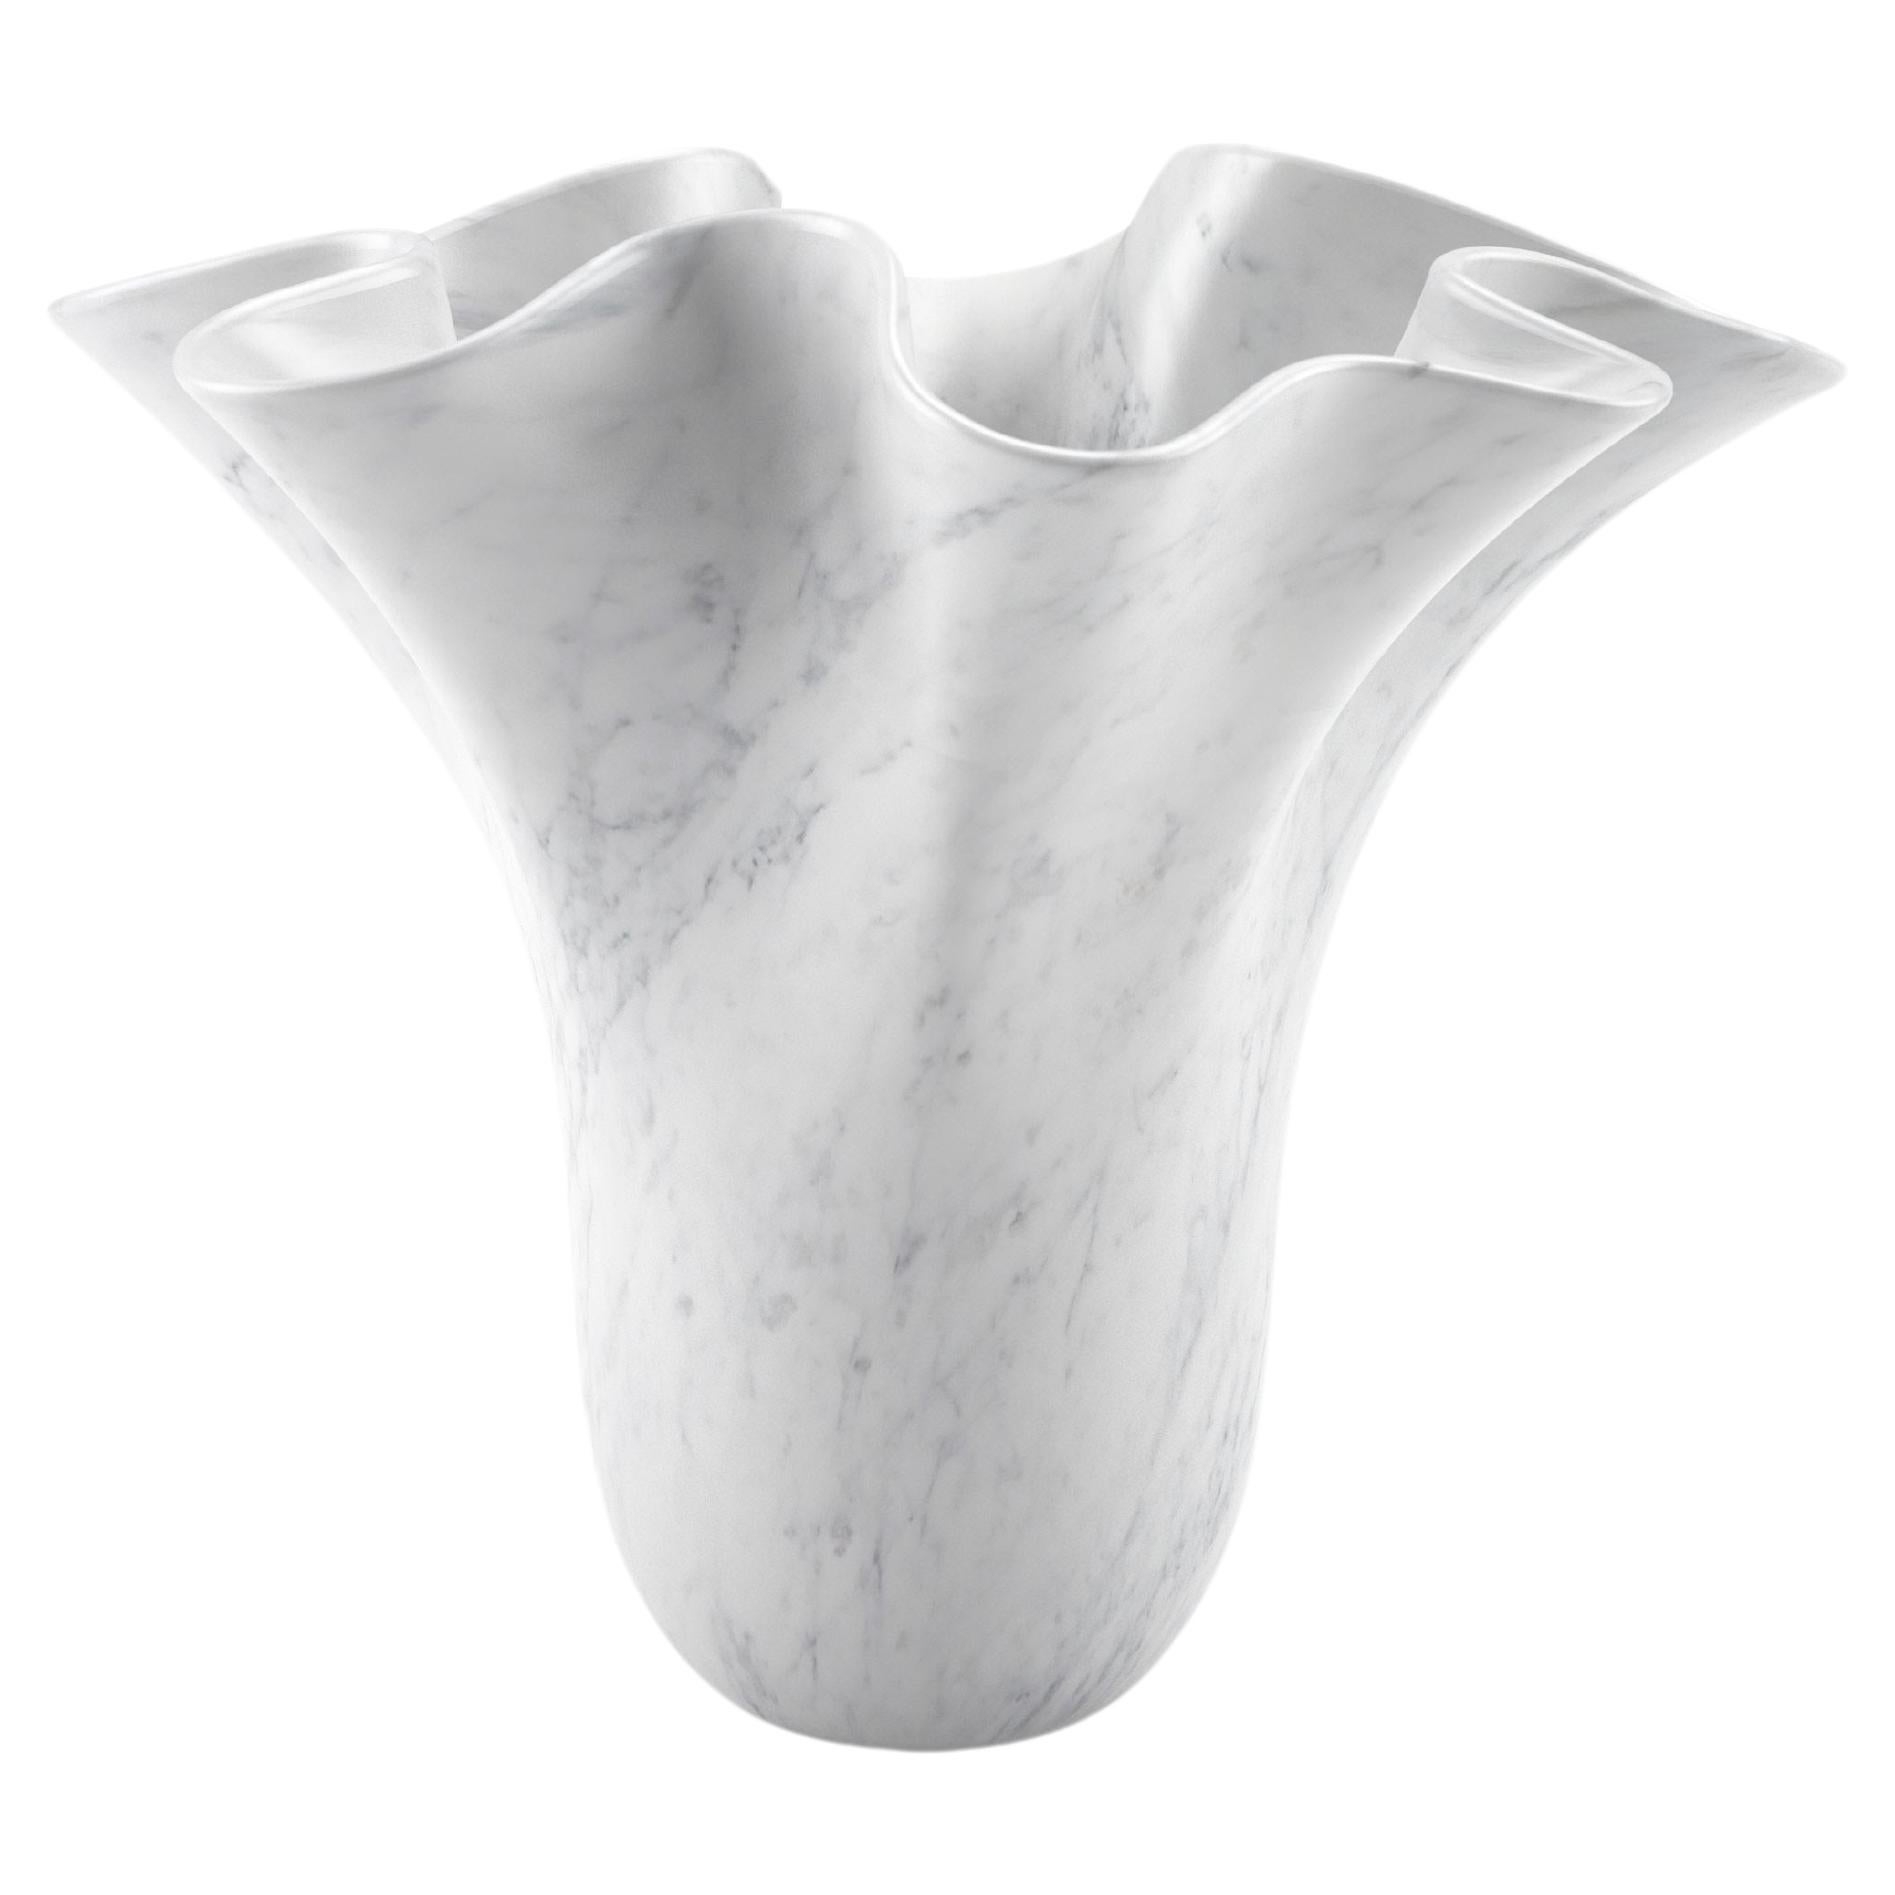 Sculptural Vase White Carrara Marble, Flower Shape Vessel, Hand Curved Italy